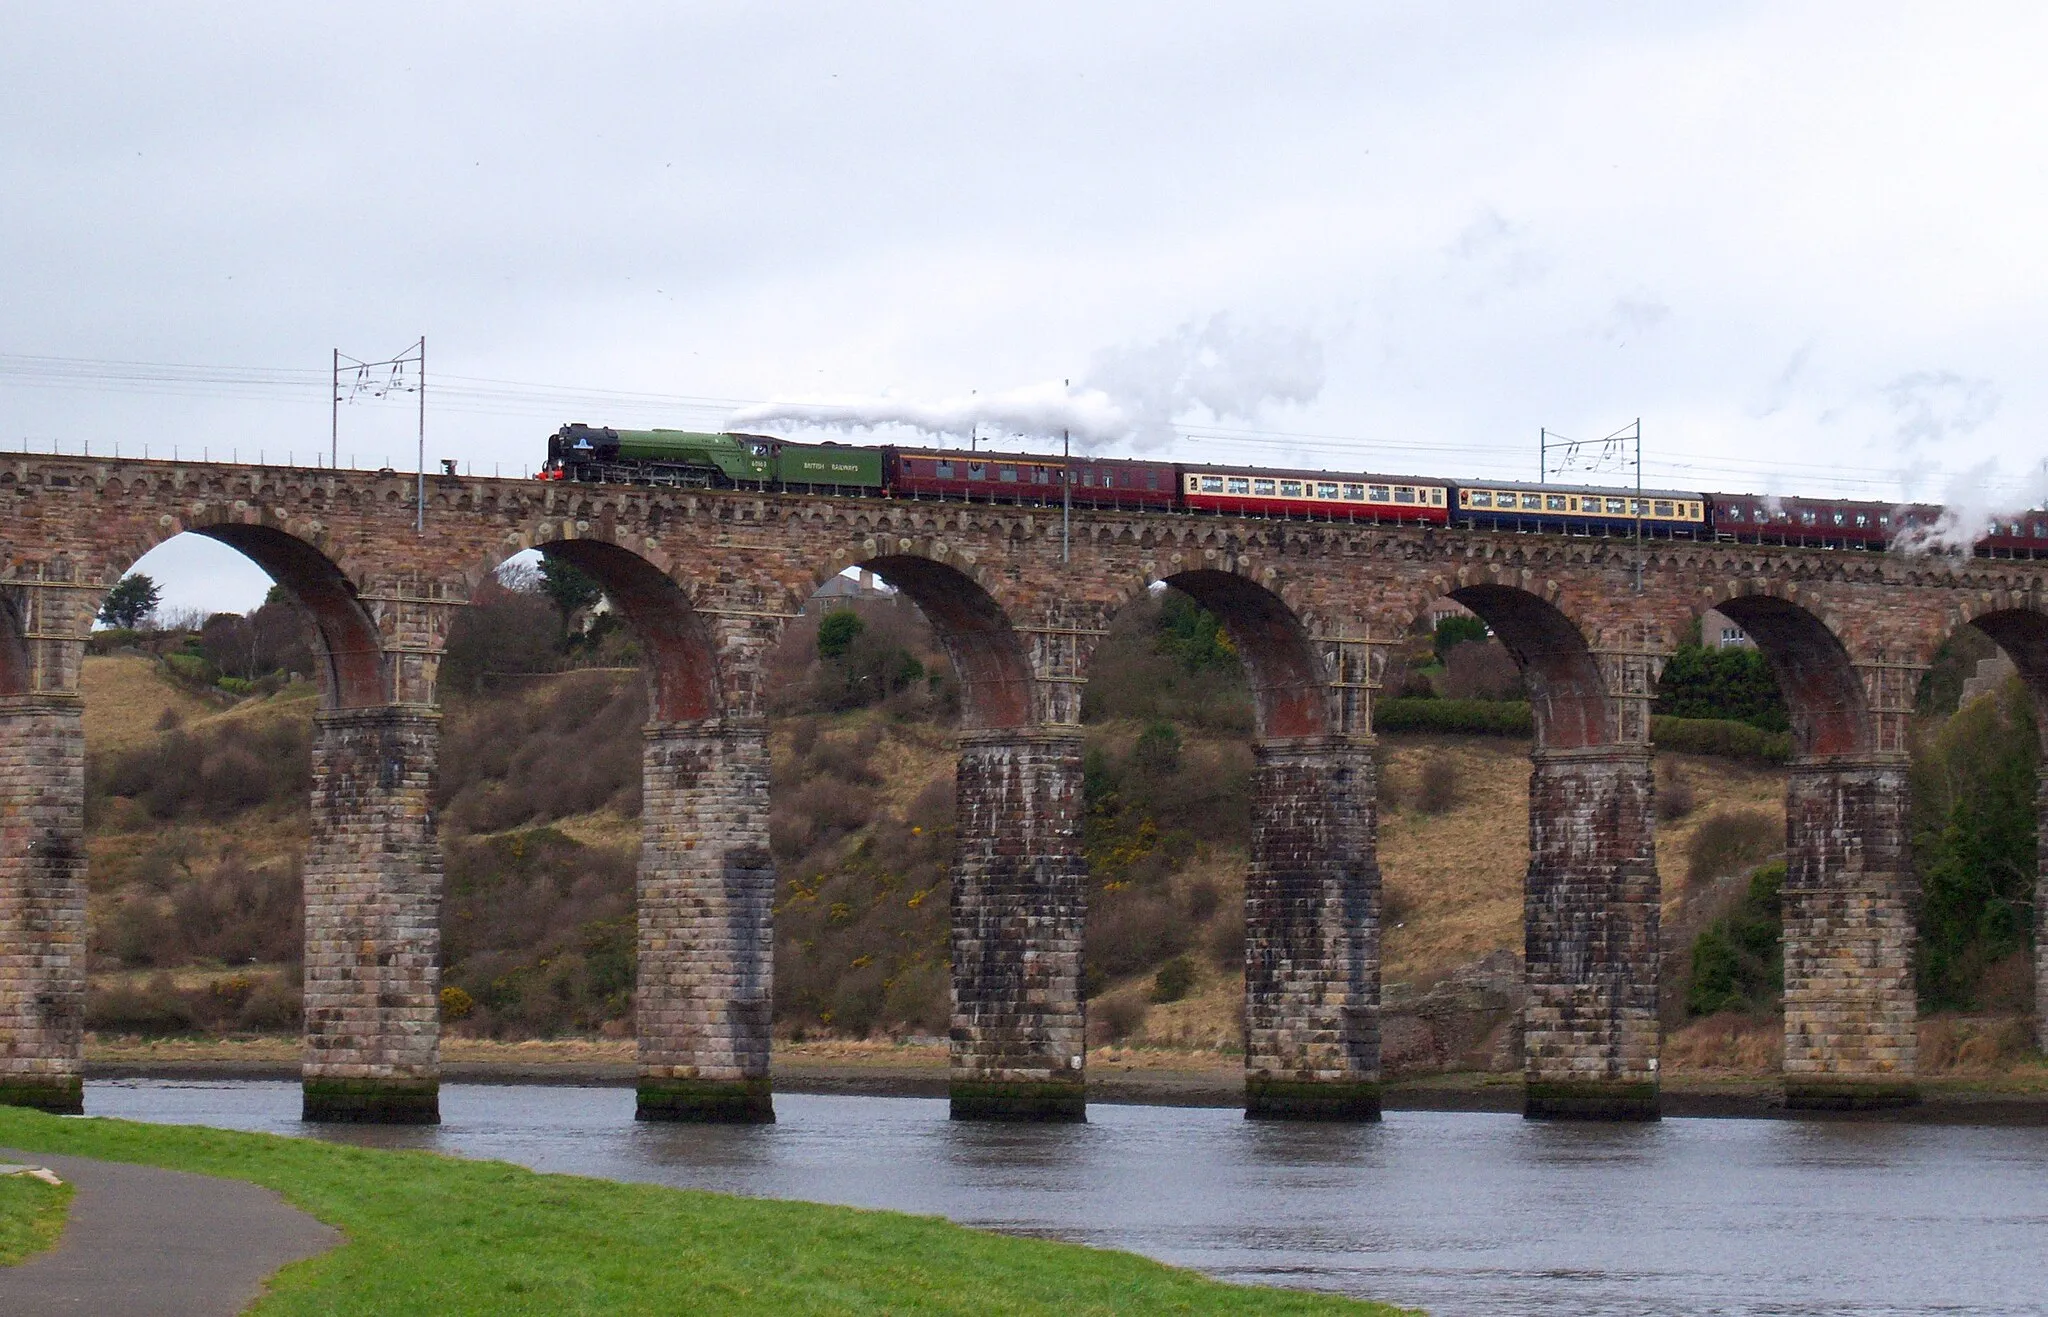 Photo showing: Brand new steam locomotive 60163 Tornado crosses the Royal Border Bridge railway viaduct in Berwick-upon-Tweed, travelling south at the head of The North Briton charter train from Edinburgh to York.
This was the first time Tornado had passed over the viaduct in the southbound direction, having crossed for the first time in northbound a week earlier, hauling The Auld Reekie Express from York to Edinburgh.
Tornado is brand new Peppercorn A1 class locomotive completed in 2008. The Peppercorn A1 was the last type of express passenger steam locomotive that was used on this route on the East Coast Main Line from Scotland to London. None of the original 49 survived the scrapyard in the change to diesel, and later, electric traction.
Tornado is coasting at this point, the steam above the locomotive is actually coming from the boiler safety valves and not the chimney, creating a false impression of a steam exhaust.

Taken at 15:12 GMT from the south bank of the River Tweed, east of the bridge, Tornado was approximately 15 minutes early for arrival in Berwick, and proceeded to Tweedmouth sidings on the other side of the bridge to take on water.